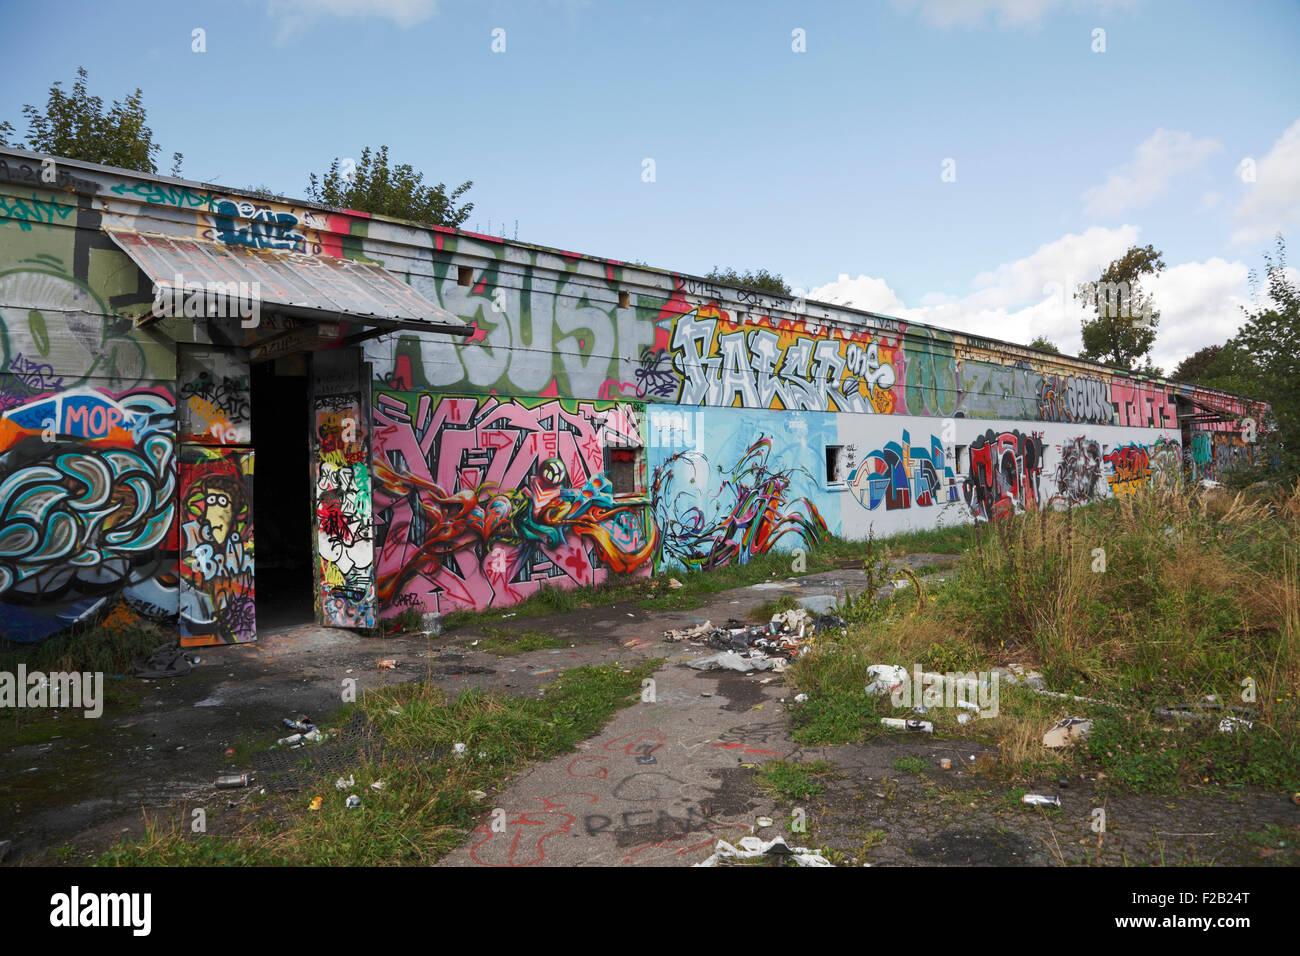 Copenhagen, Denmark. 15th  September, 2015. Restaurant Noma will close right after New Year's Eve 2016 to re-open in 2017 in a new restaurant with an urban farm. This old naval mine depot full of graffiti and street art in a listed area of historic defences, close to the free town Christiania, earlier also housing the Royal Danish Academy of Fine Arts, School of Architecture, will become the building site for the new restaurant. Plans are to put a greenhouse on the roof, replace the asphalt with good, fresh soil, and place a floating field on a raft in the lake. Credit:  Niels Quist/Alamy Live Stock Photo